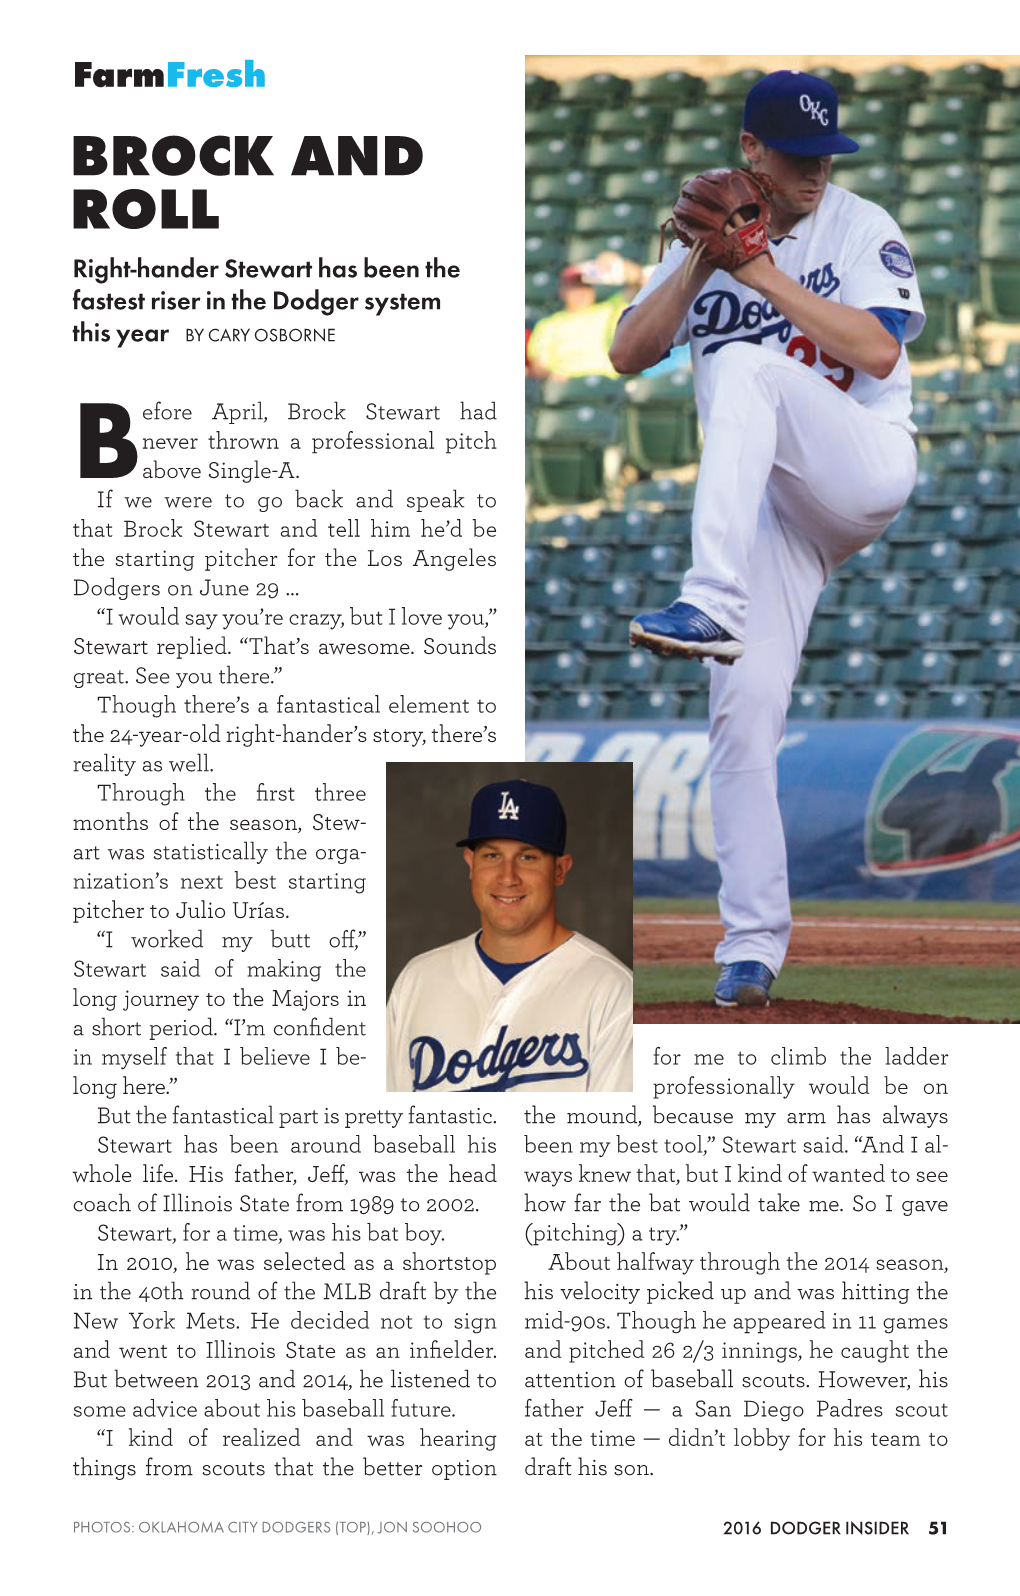 BROCK and ROLL Right-Hander Stewart Has Been the Fastest Riser in the Dodger System This Year by CARY OSBORNE